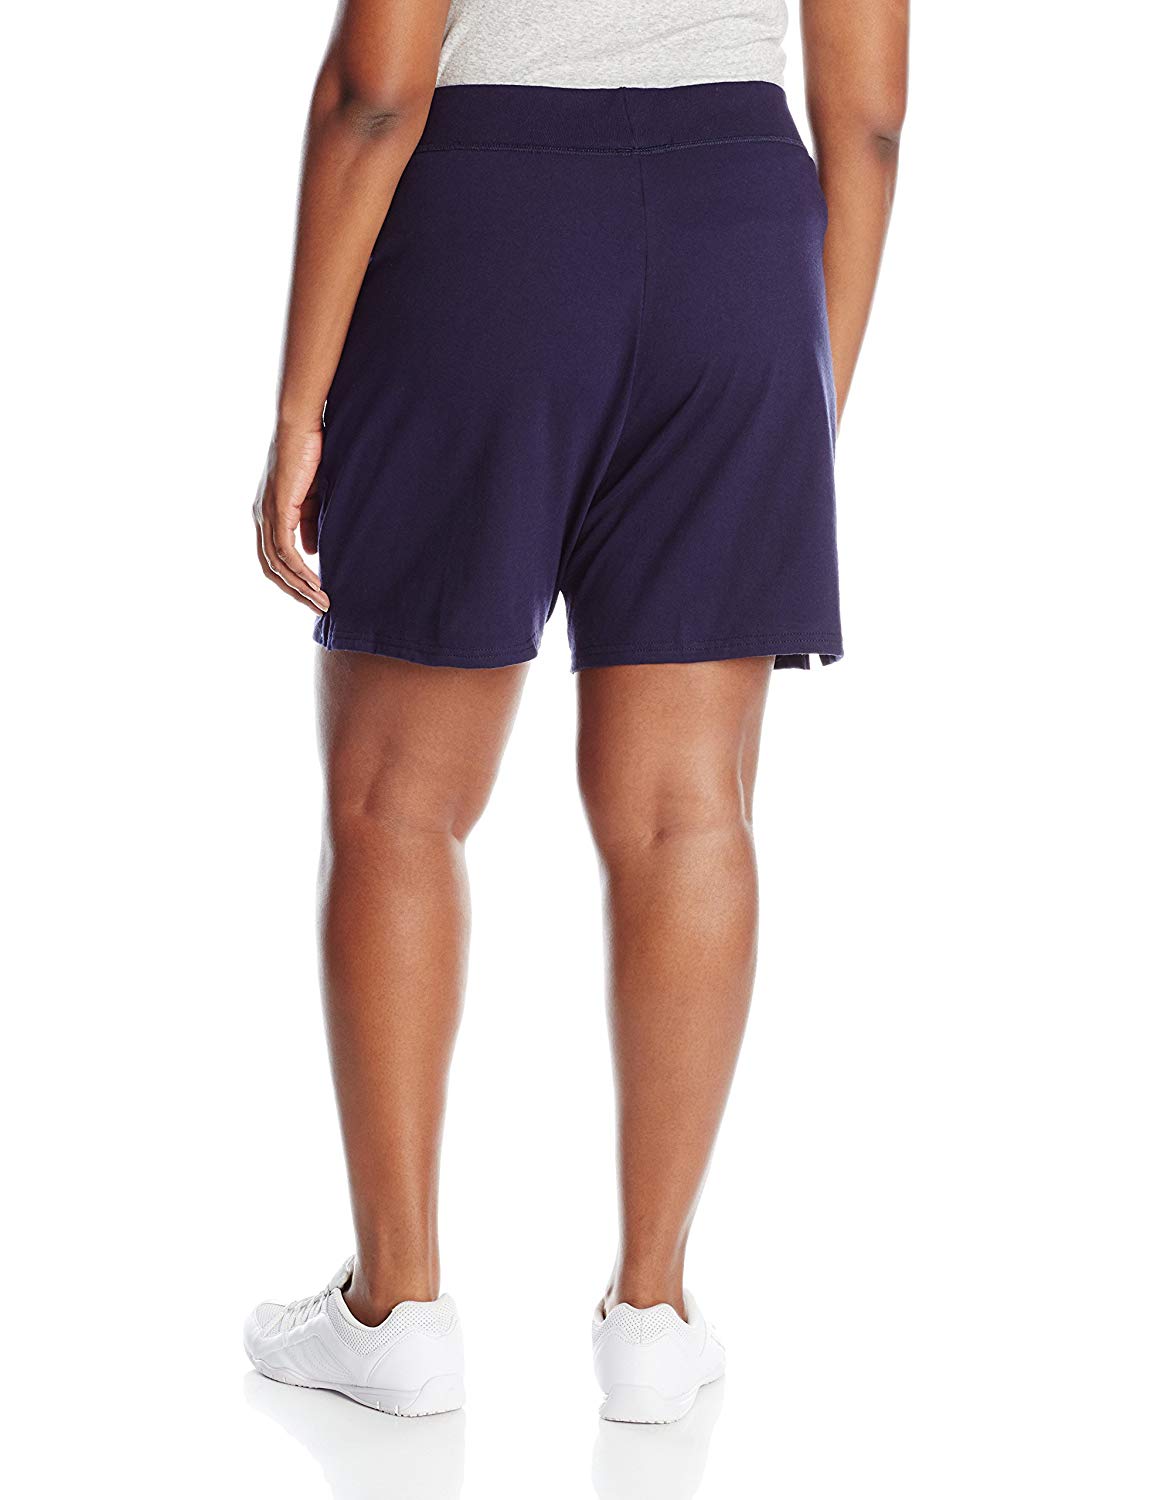 Just My Size Women's Plus Cotton Jersey Pull-On Shorts - 1X Plus, Navy ...